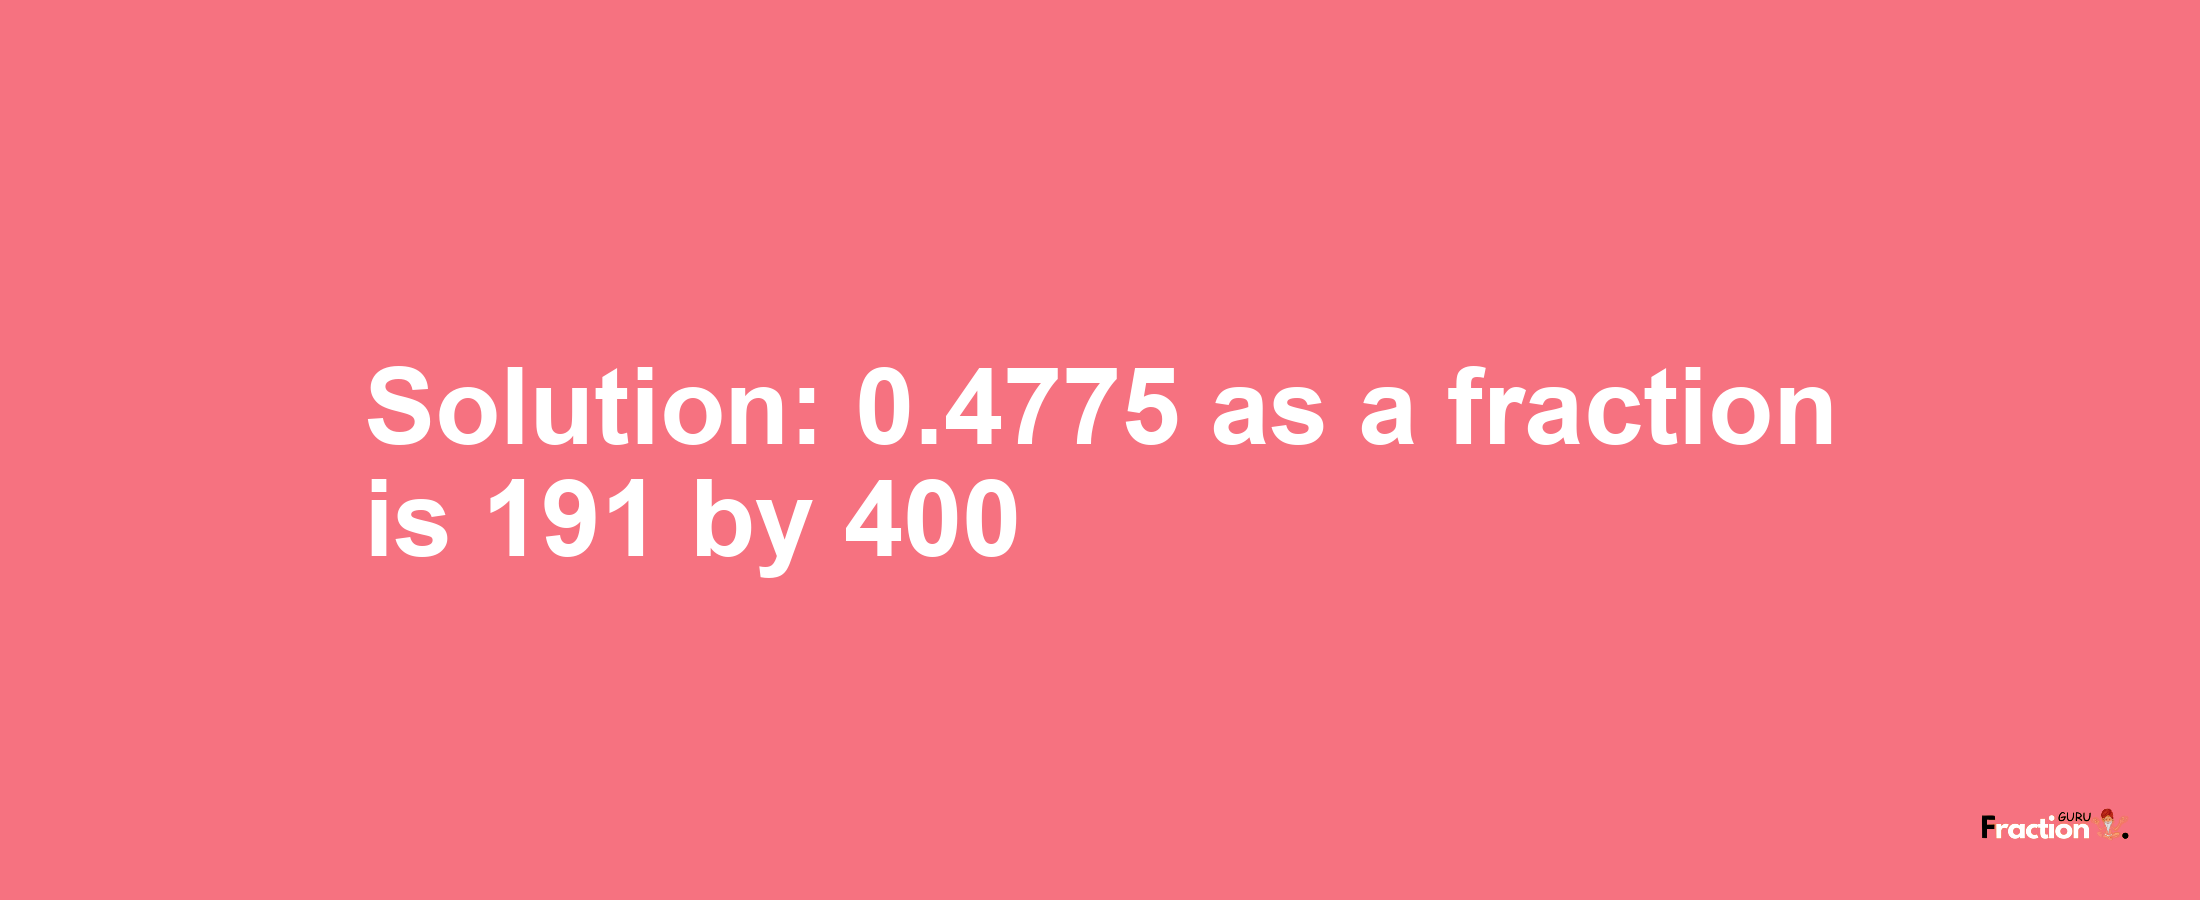 Solution:0.4775 as a fraction is 191/400